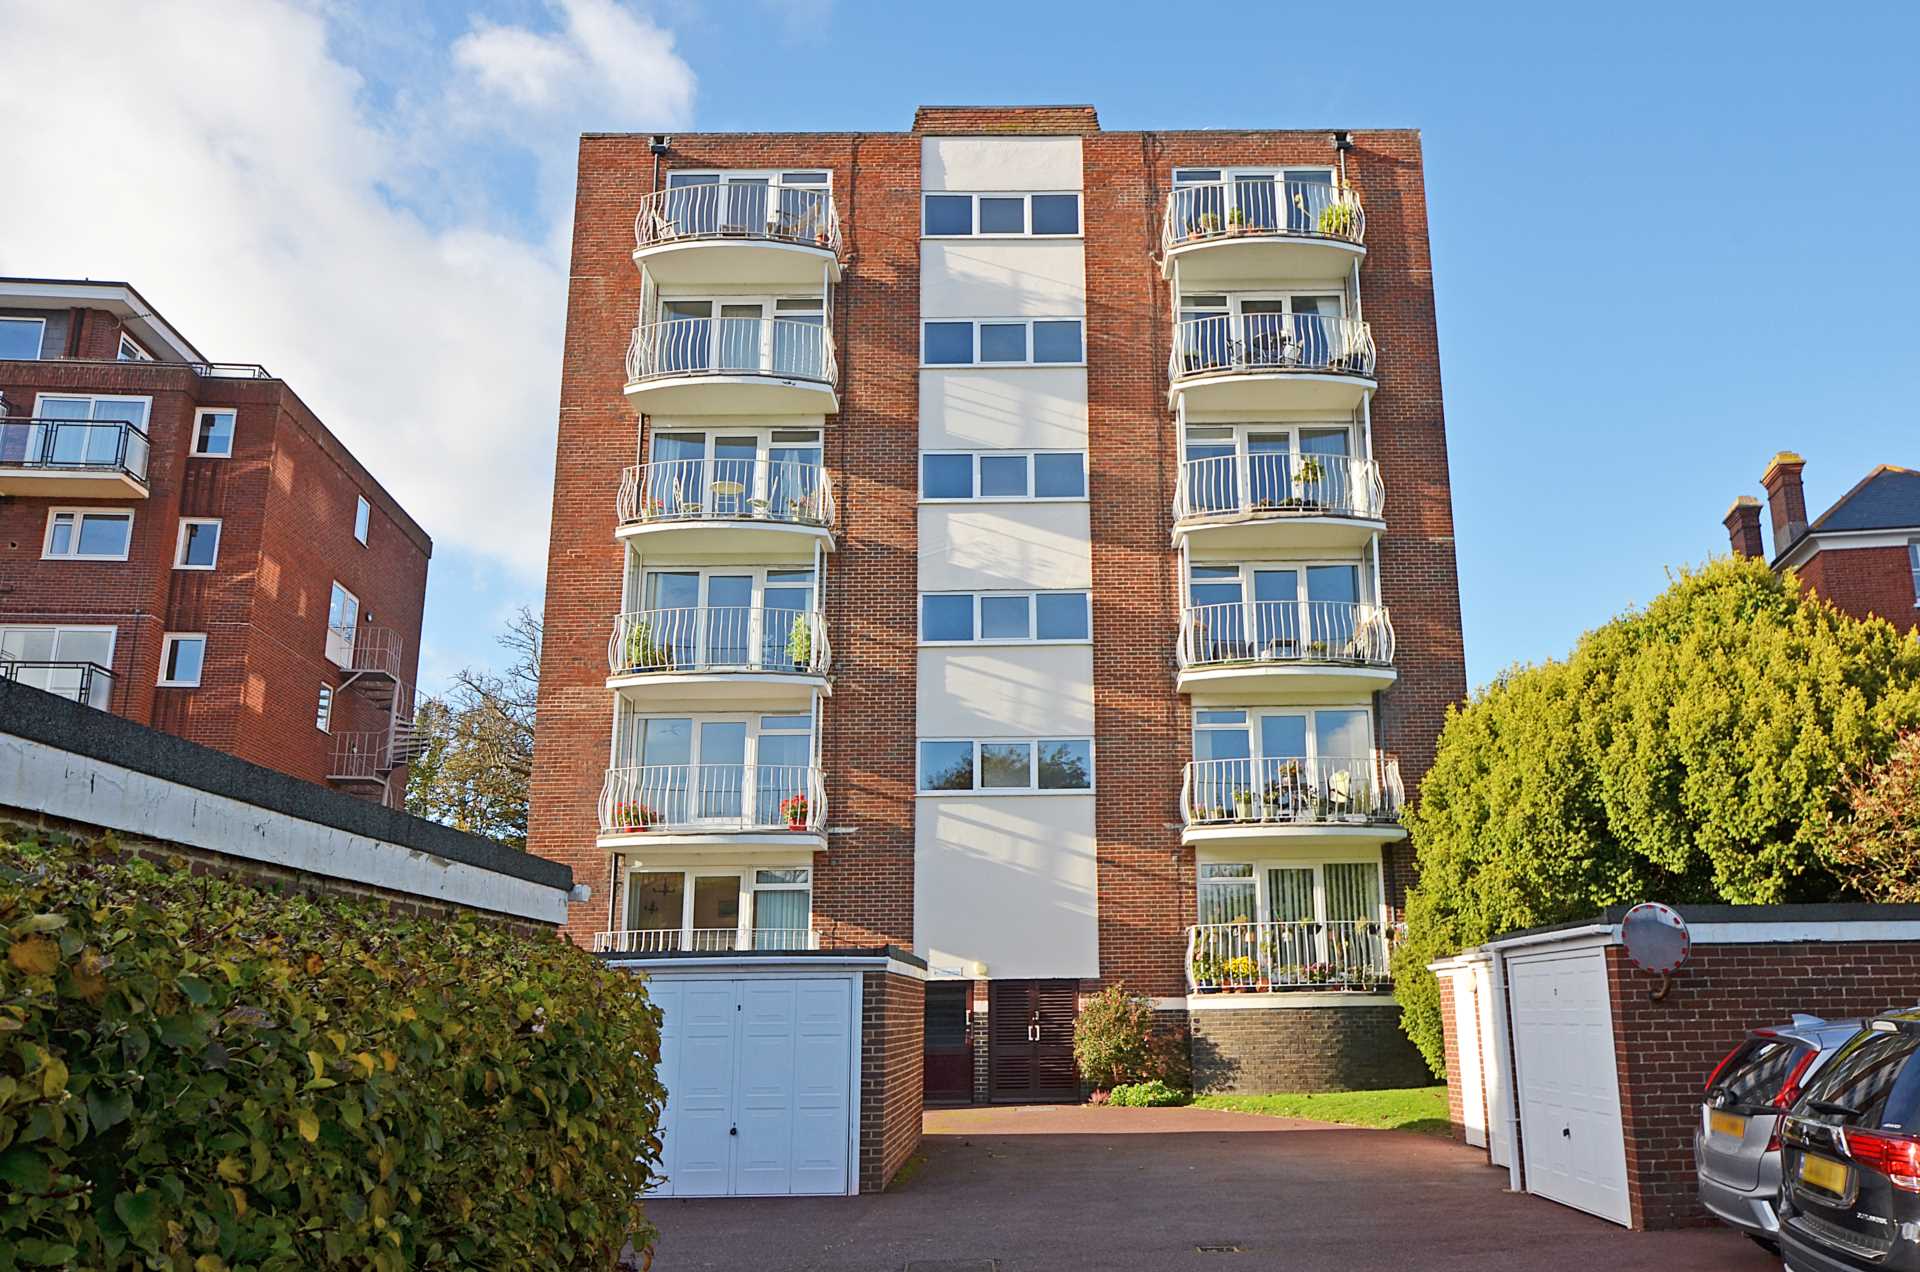 Meads Road, Eastbourne, BN20 7PX, Image 1